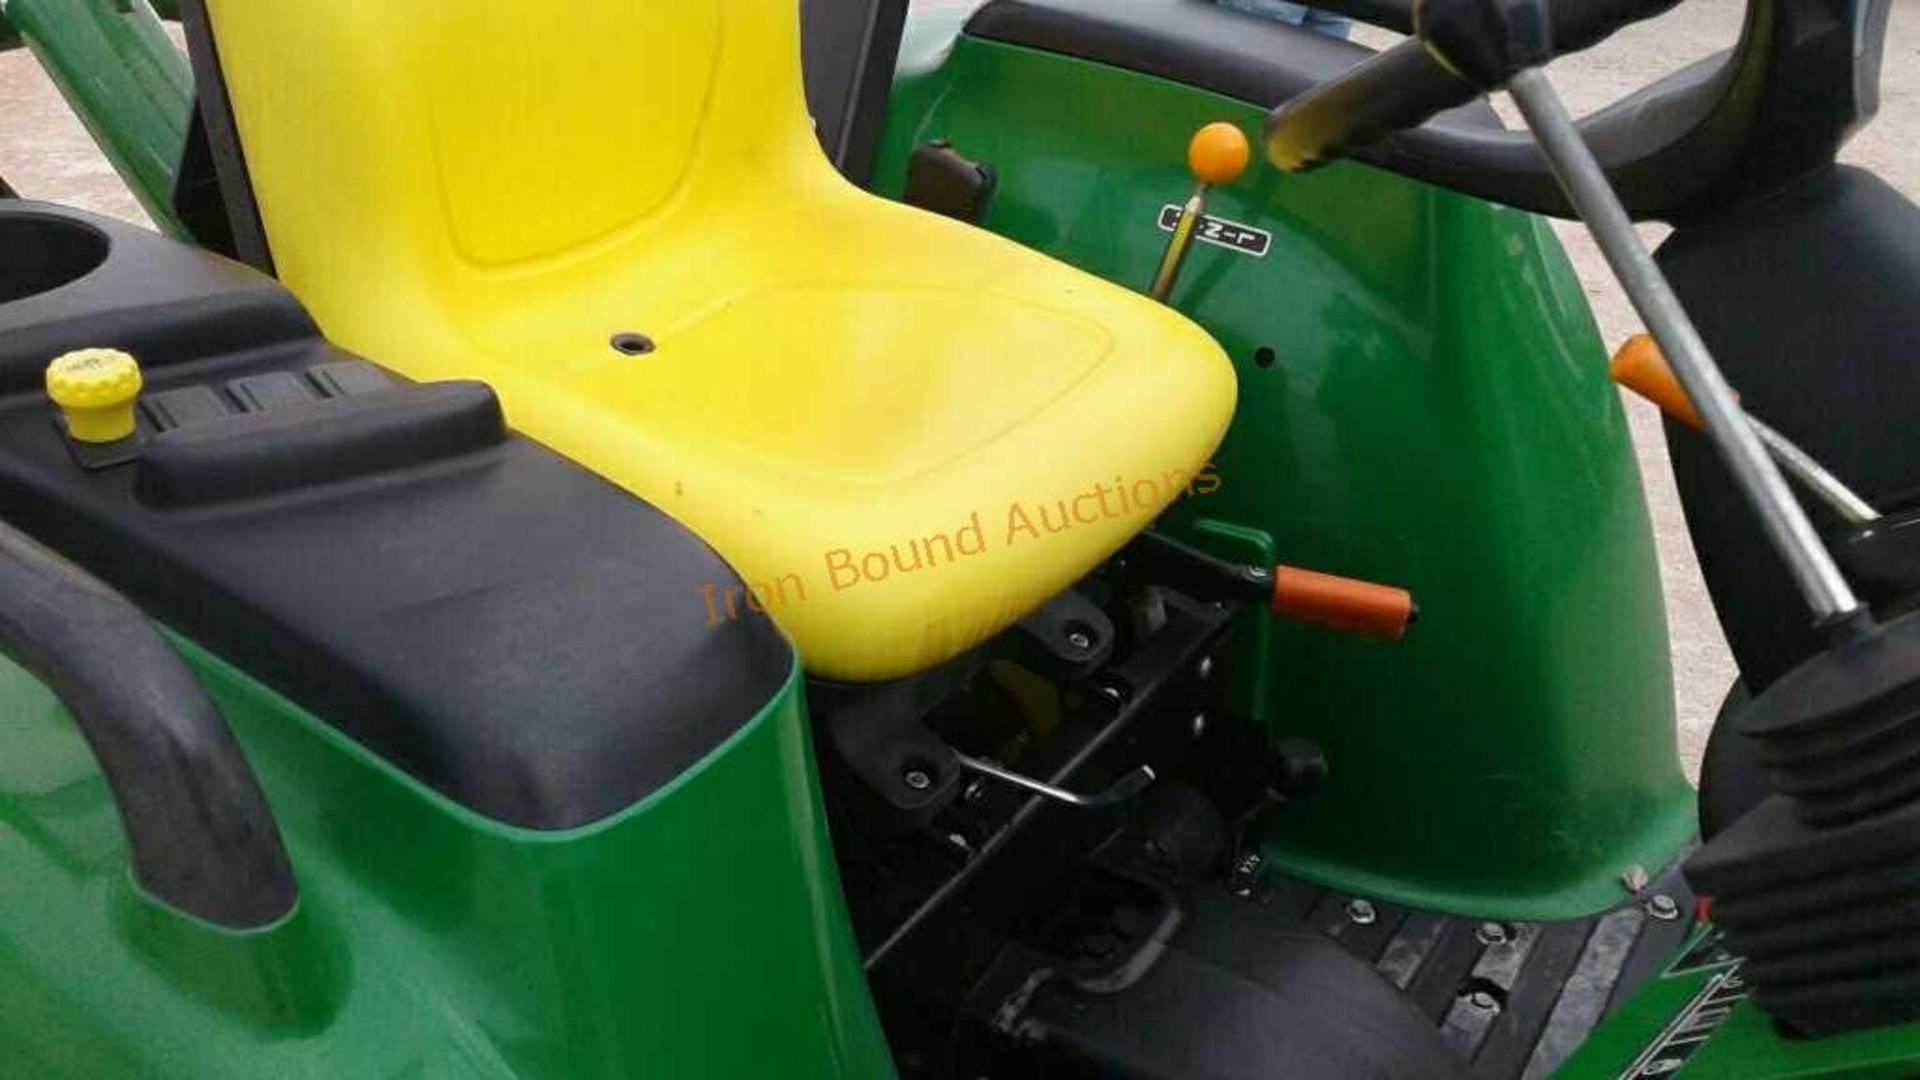 2014 John Deere 3038E Tractor with Implements - Image 15 of 16